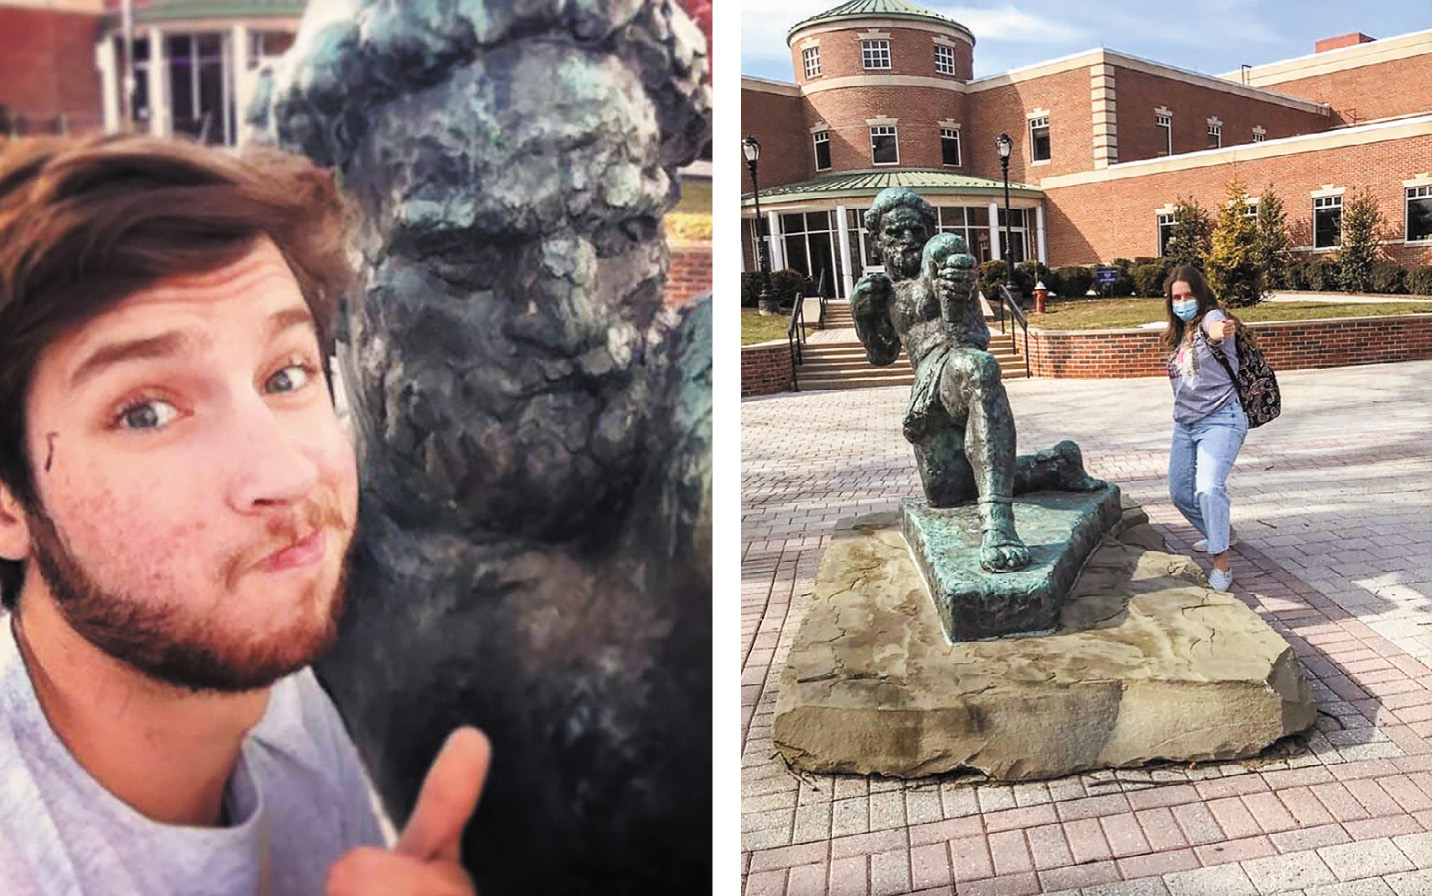 Two photos: on the left, a young man snags a selfie with the Ulysses statue. On the right, a young woman wearing a mask poses next to the Ulysses statue.